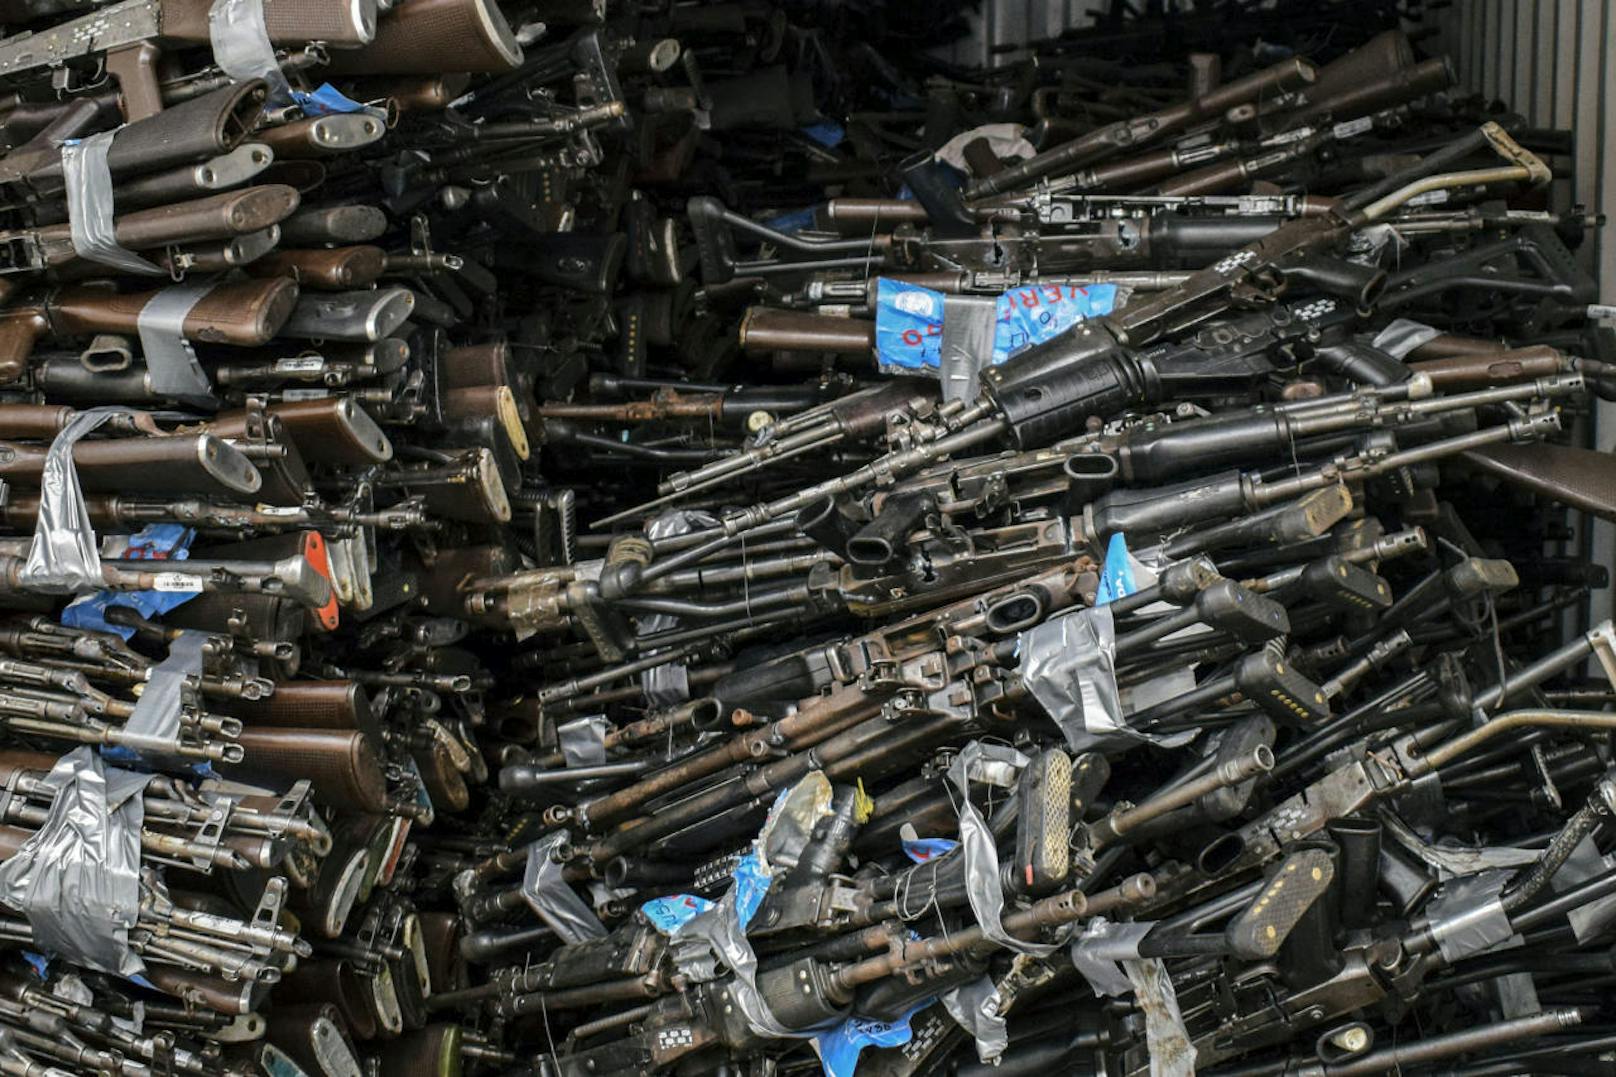 Download von www.picturedesk.com am 14.10.2017 (13:28). 
*** SERVICEBILD *** This handout photograph obtained courtesy of the United Nations Mission in Colombia shows arms and ammunition, part of 69 tons from the former Revolutionary Armed Forces of Colombia (FARC, Marxists) handed over to the Colombian government by the UN Mission in Colombia, on October 13, 2017 in Bogota. .The armaments will be fused to construct three monuments: one in New York, seat of the United Nations, one in Havana, and the last in Colombia. The United Nations had on September 15, 2017 ended its work in the disarmament of the former Revolutionary Armed Forces of Colombia. / AFP PHOTO / UN Mission in Colombia / HO / .== RESTRICTED TO EDITORIAL USE / MANDATORY CREDIT: "AFP PHOTO / UN MISSION IN COLOMBIA" / NO MARKETING / NO ADVERTISING CAMPAIGNS / DISTRIBUTED AS A SERVICE TO CLIENTS ==. - 20171013_PD6665 - Rechteinfo: Bei diesem Bild ist APA-PictureDesk ausschließlich technischer Dienstleister und stellt eine technische Bearbeitungsgebühr in Rechnung. APA-PictureDesk ist weder Urheber noch Rechteinhaber bei diesem Bild. Die Nutzung liegt in alleiniger Verantwortung des Kunden. Nur für redaktionelle Nutzung! - Editorial Use Only! Werbliche Nutzung nur nach Freigabe!